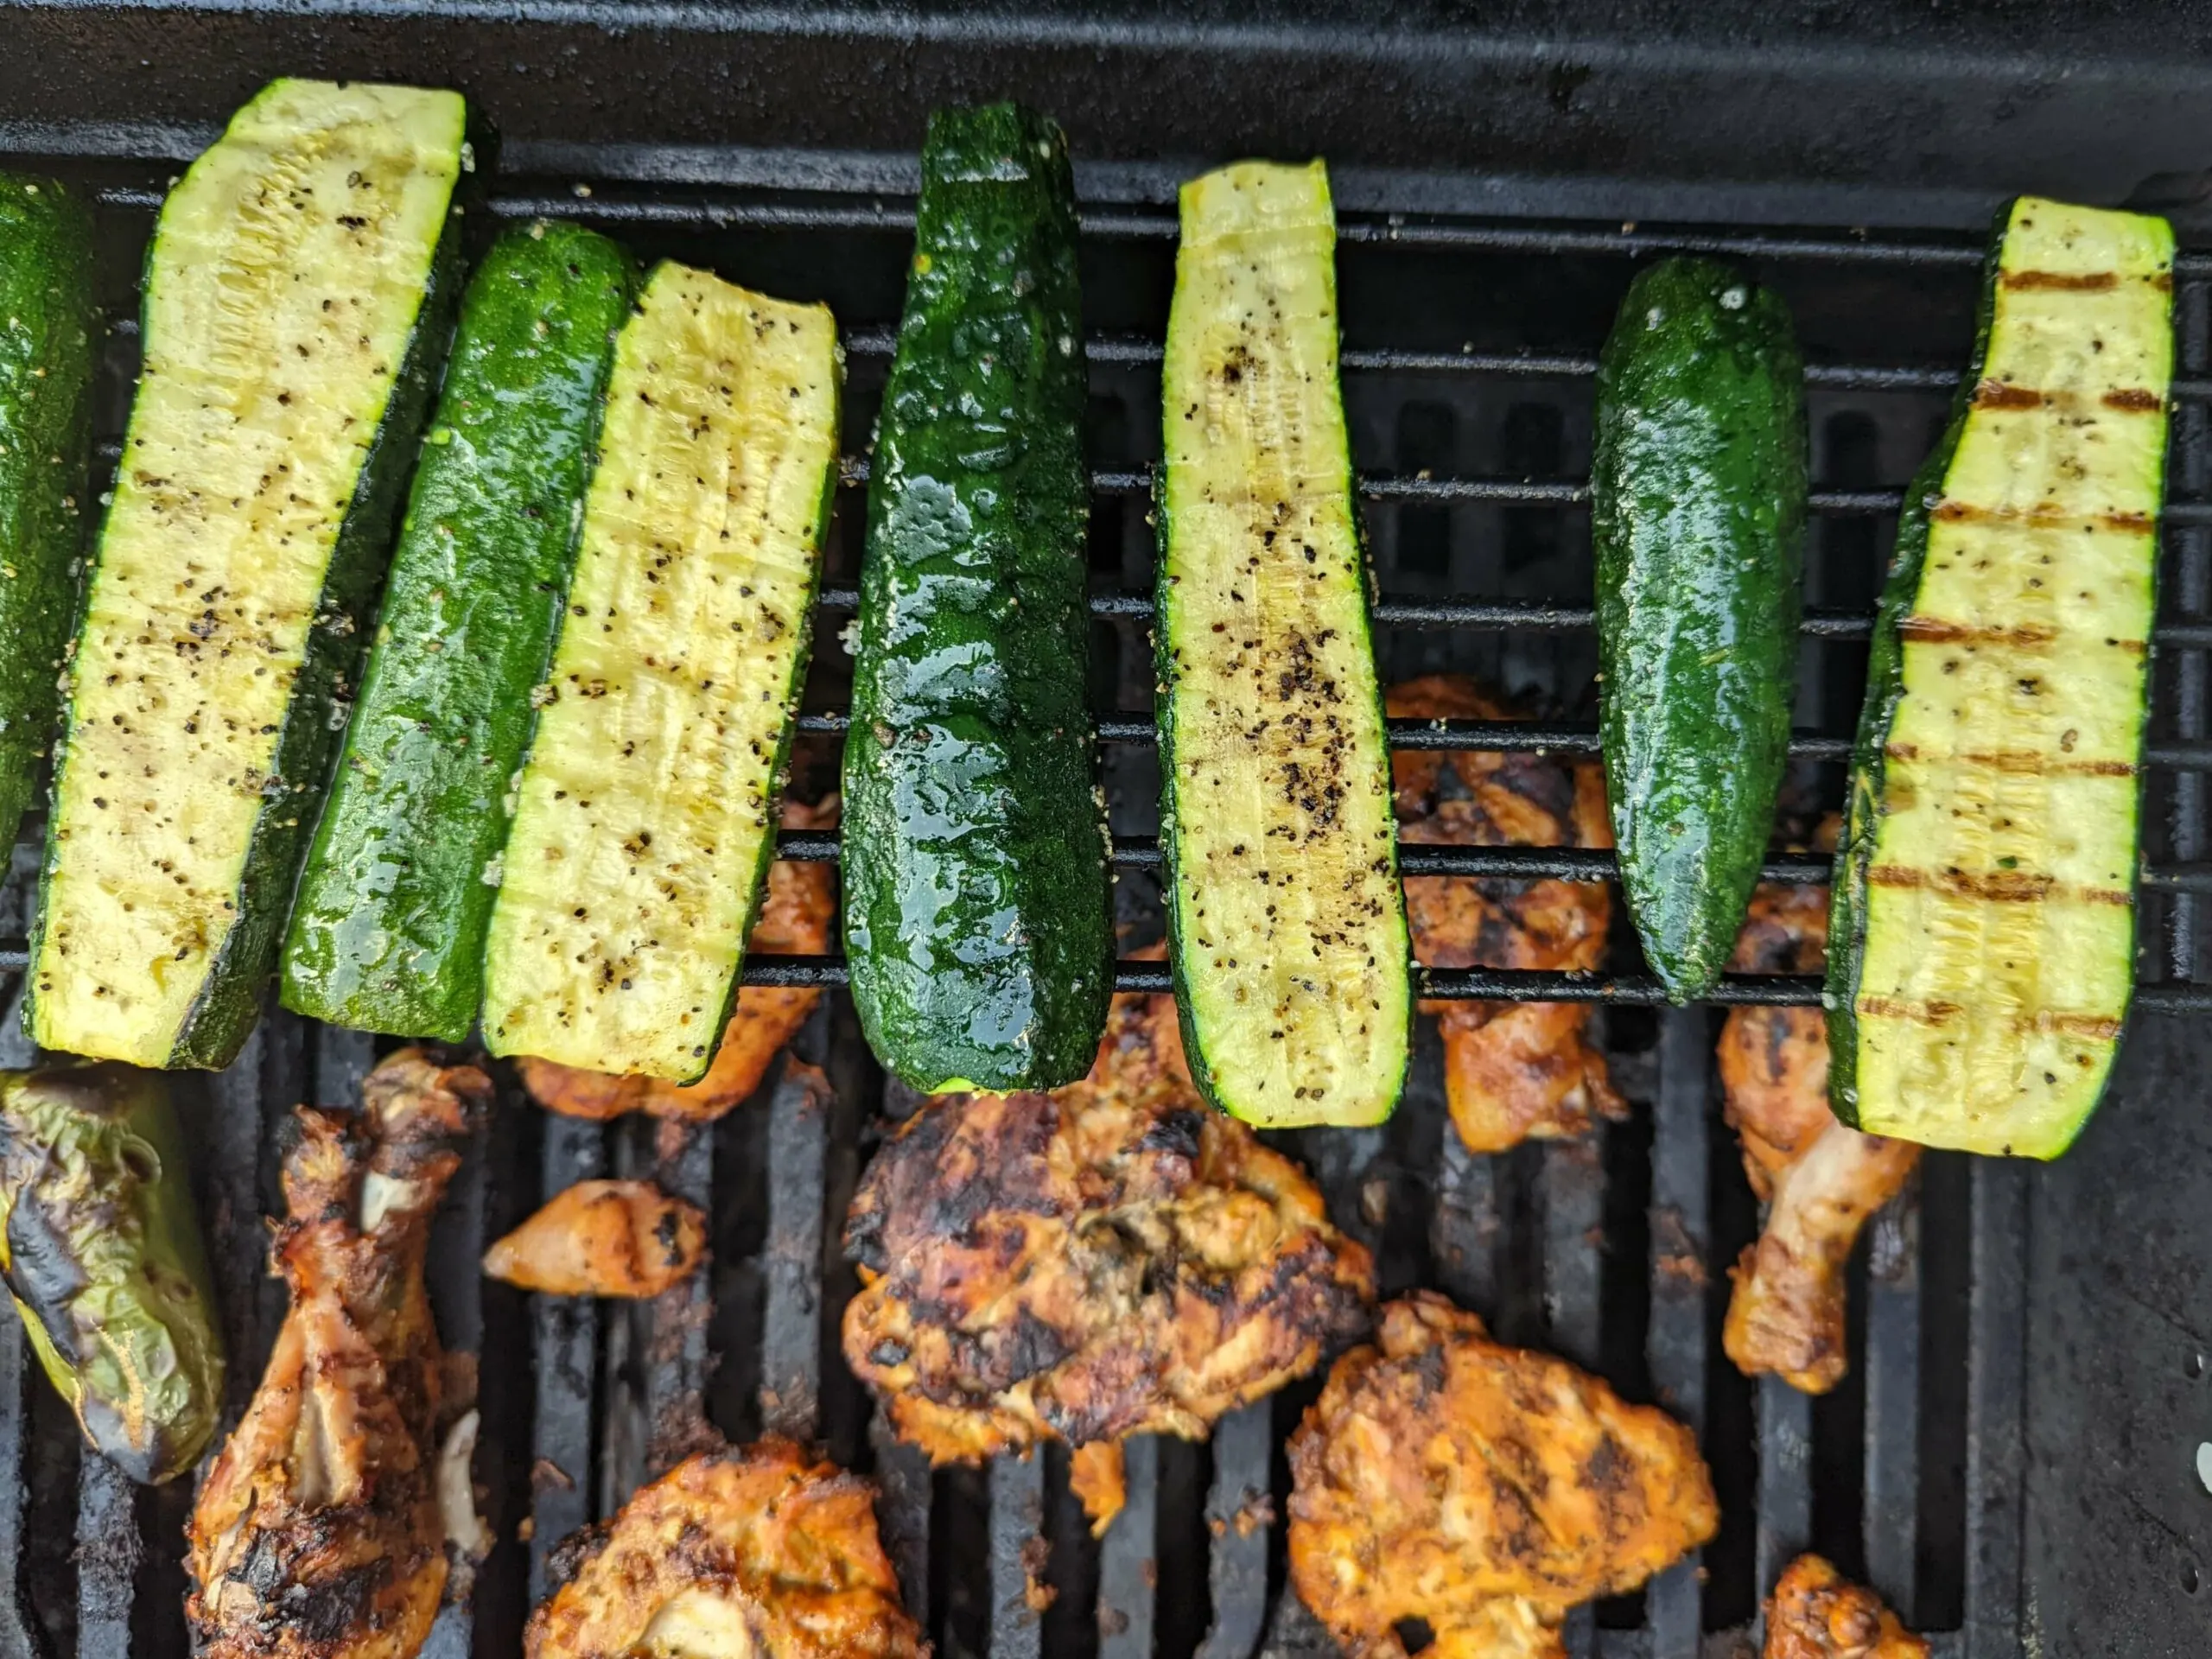 Zucchini cooking on the grill with chicken grilling in the background.